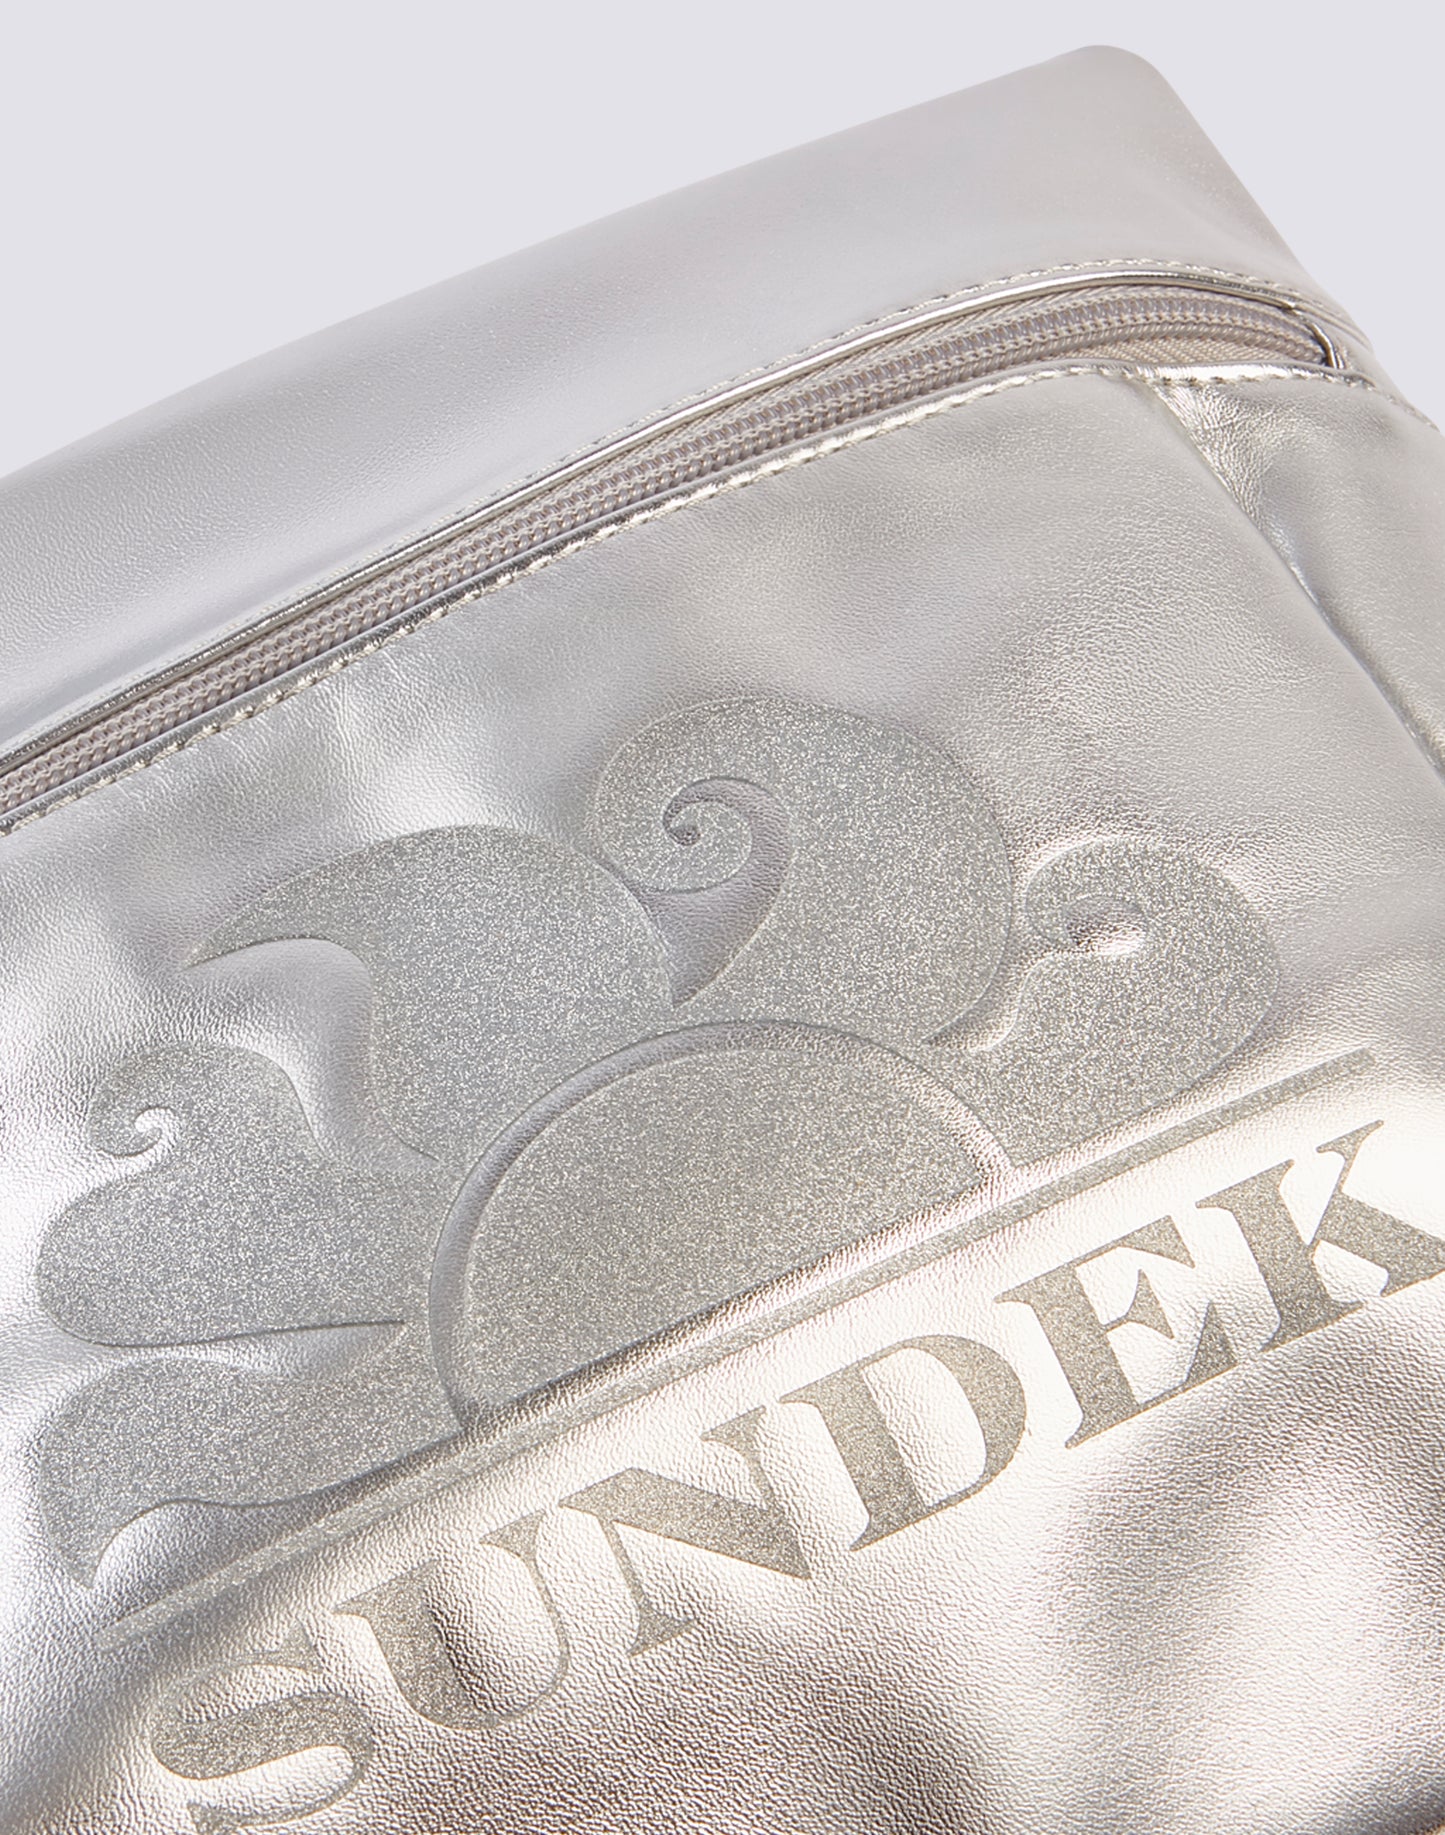 LAMINATED CLUTCH BAG WITH LOGO